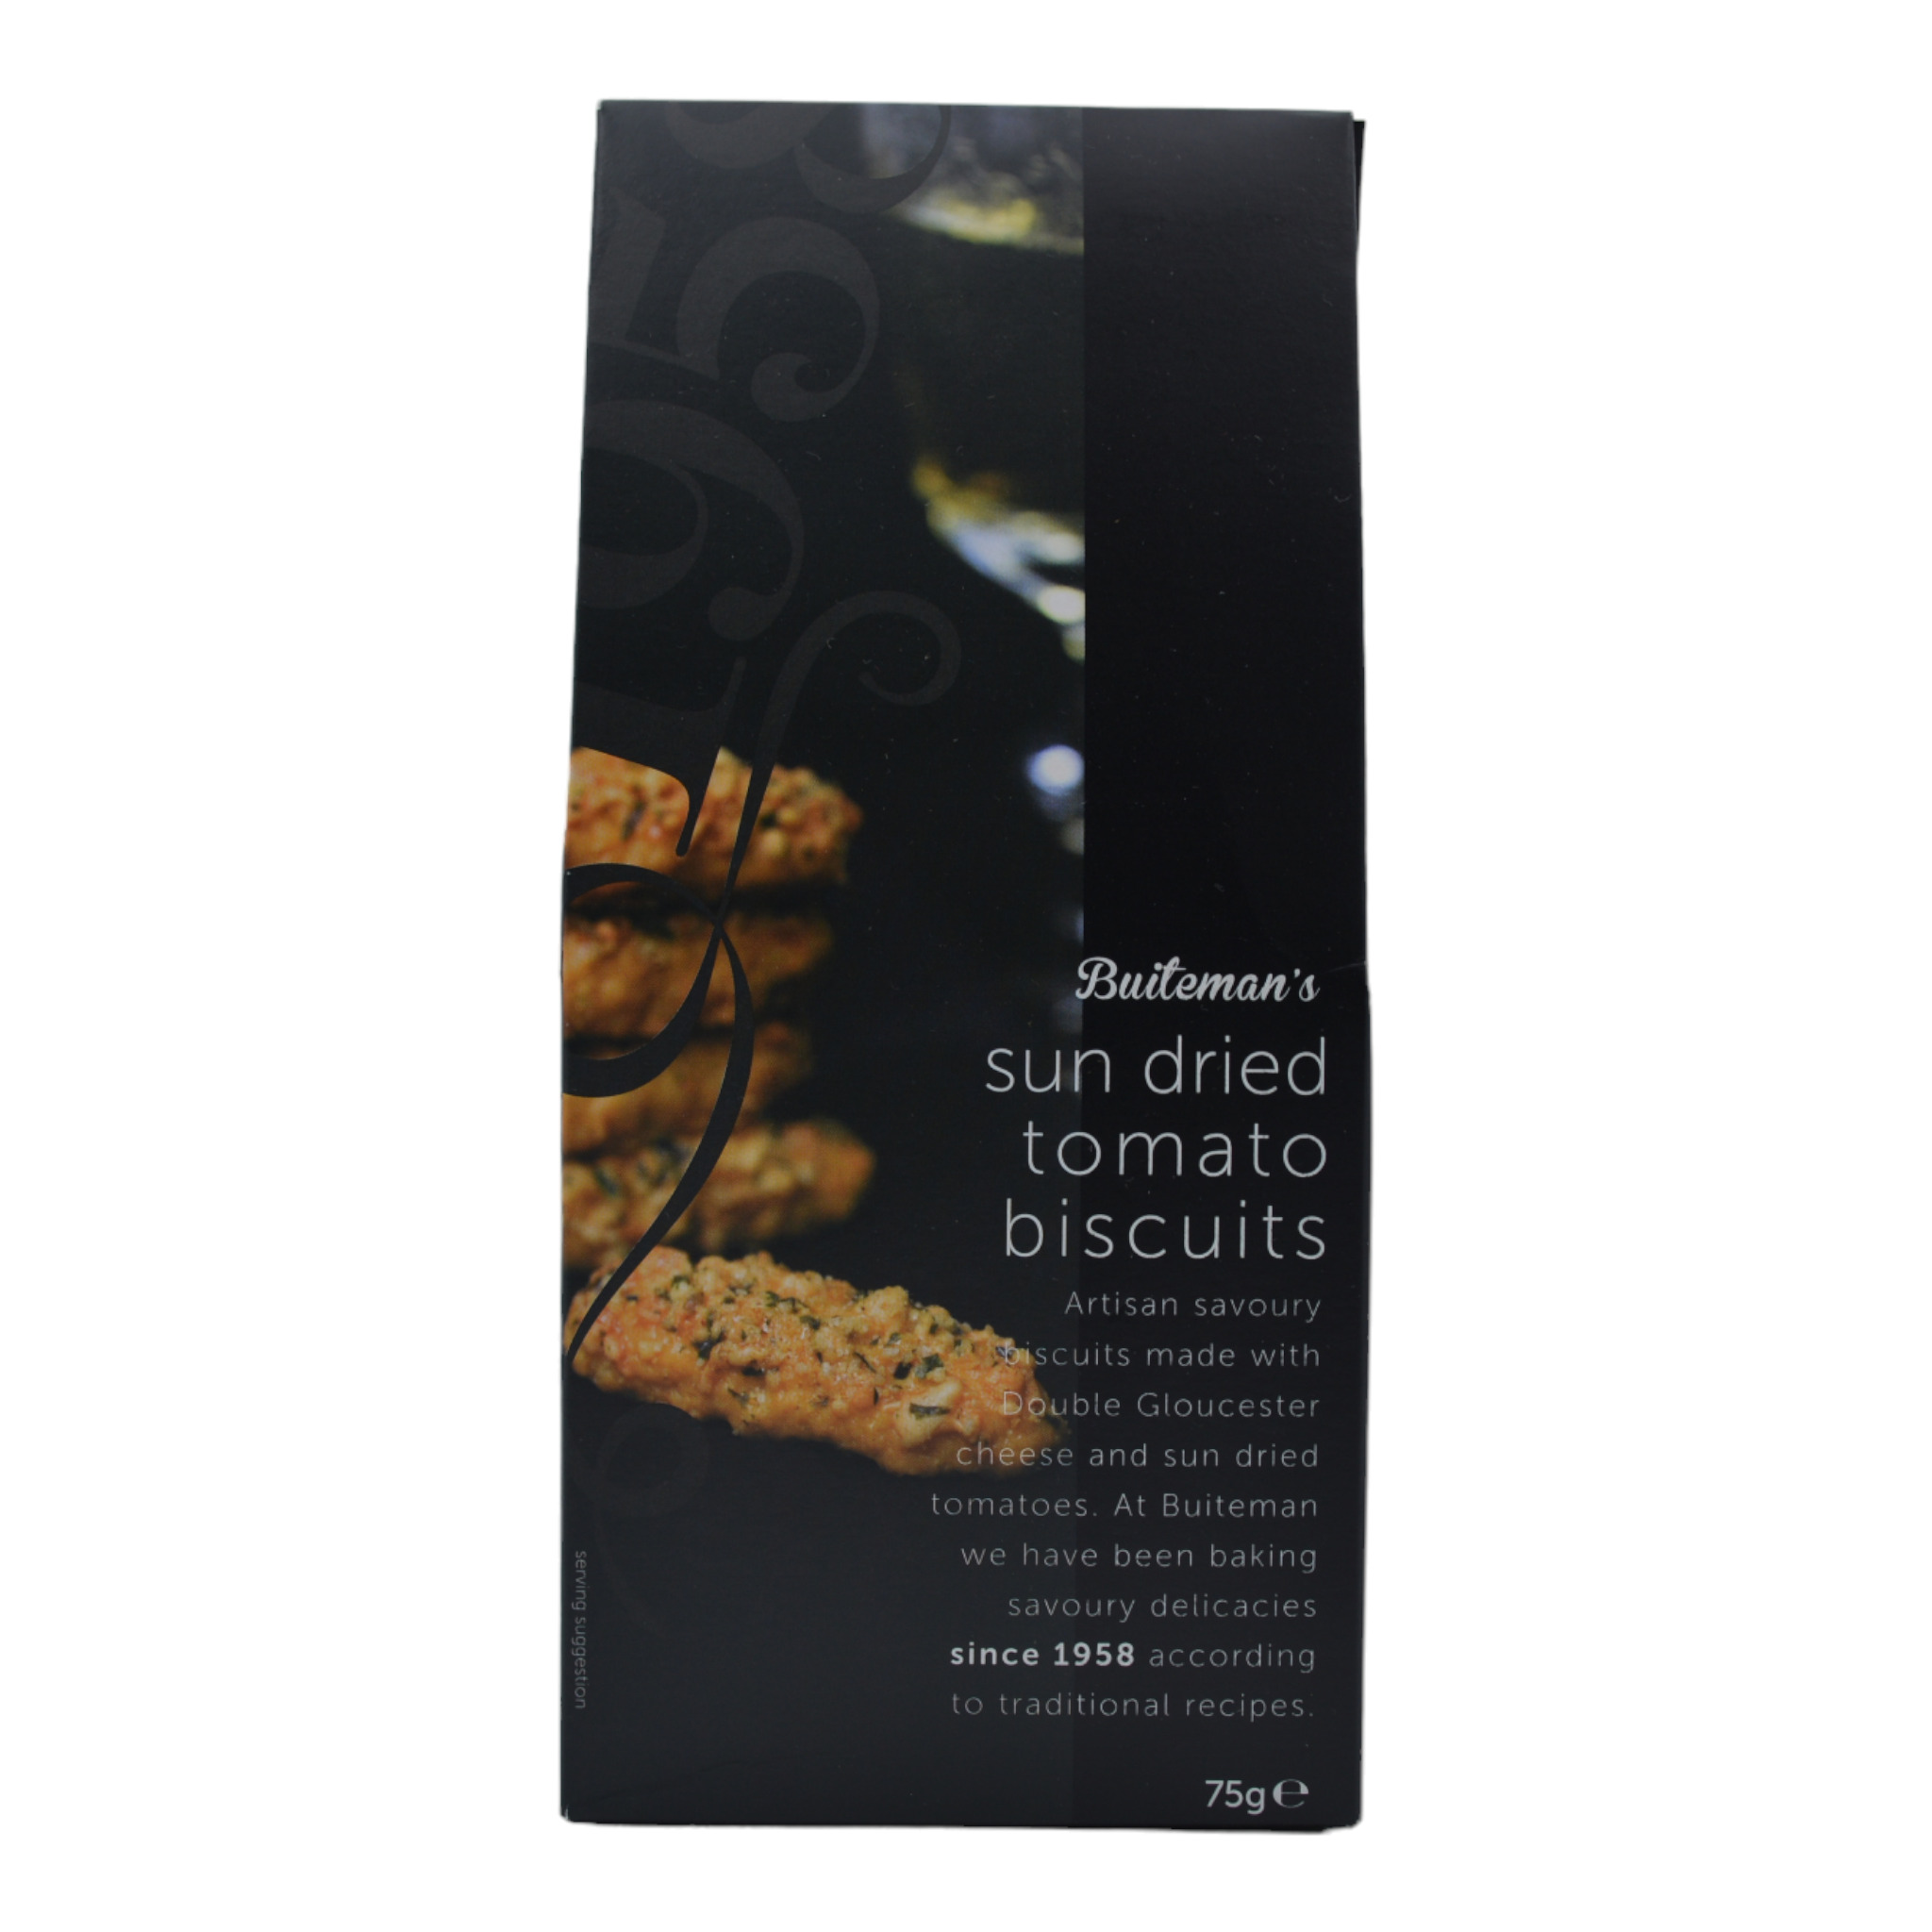 - Buitemans sun dried tomato biscuits f